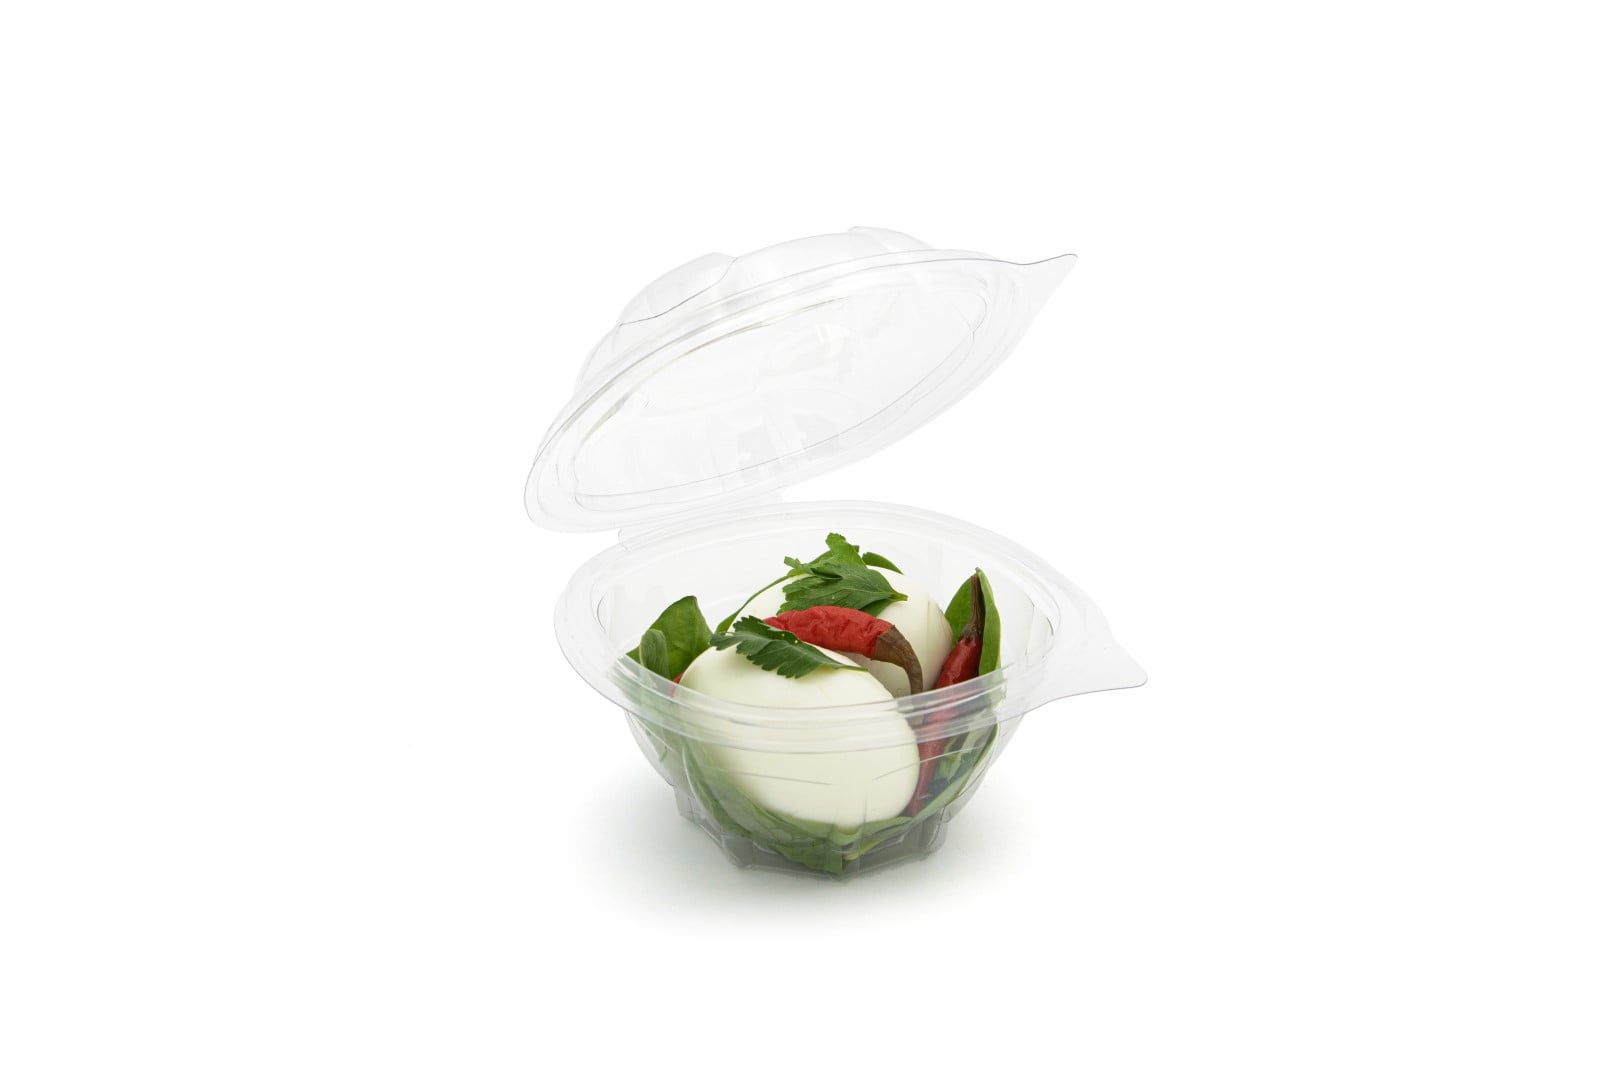 https://greenpak.supplies/wp-content/uploads/2018/06/250ml-Round-Hinged-Salad-Container-open-Large.jpg